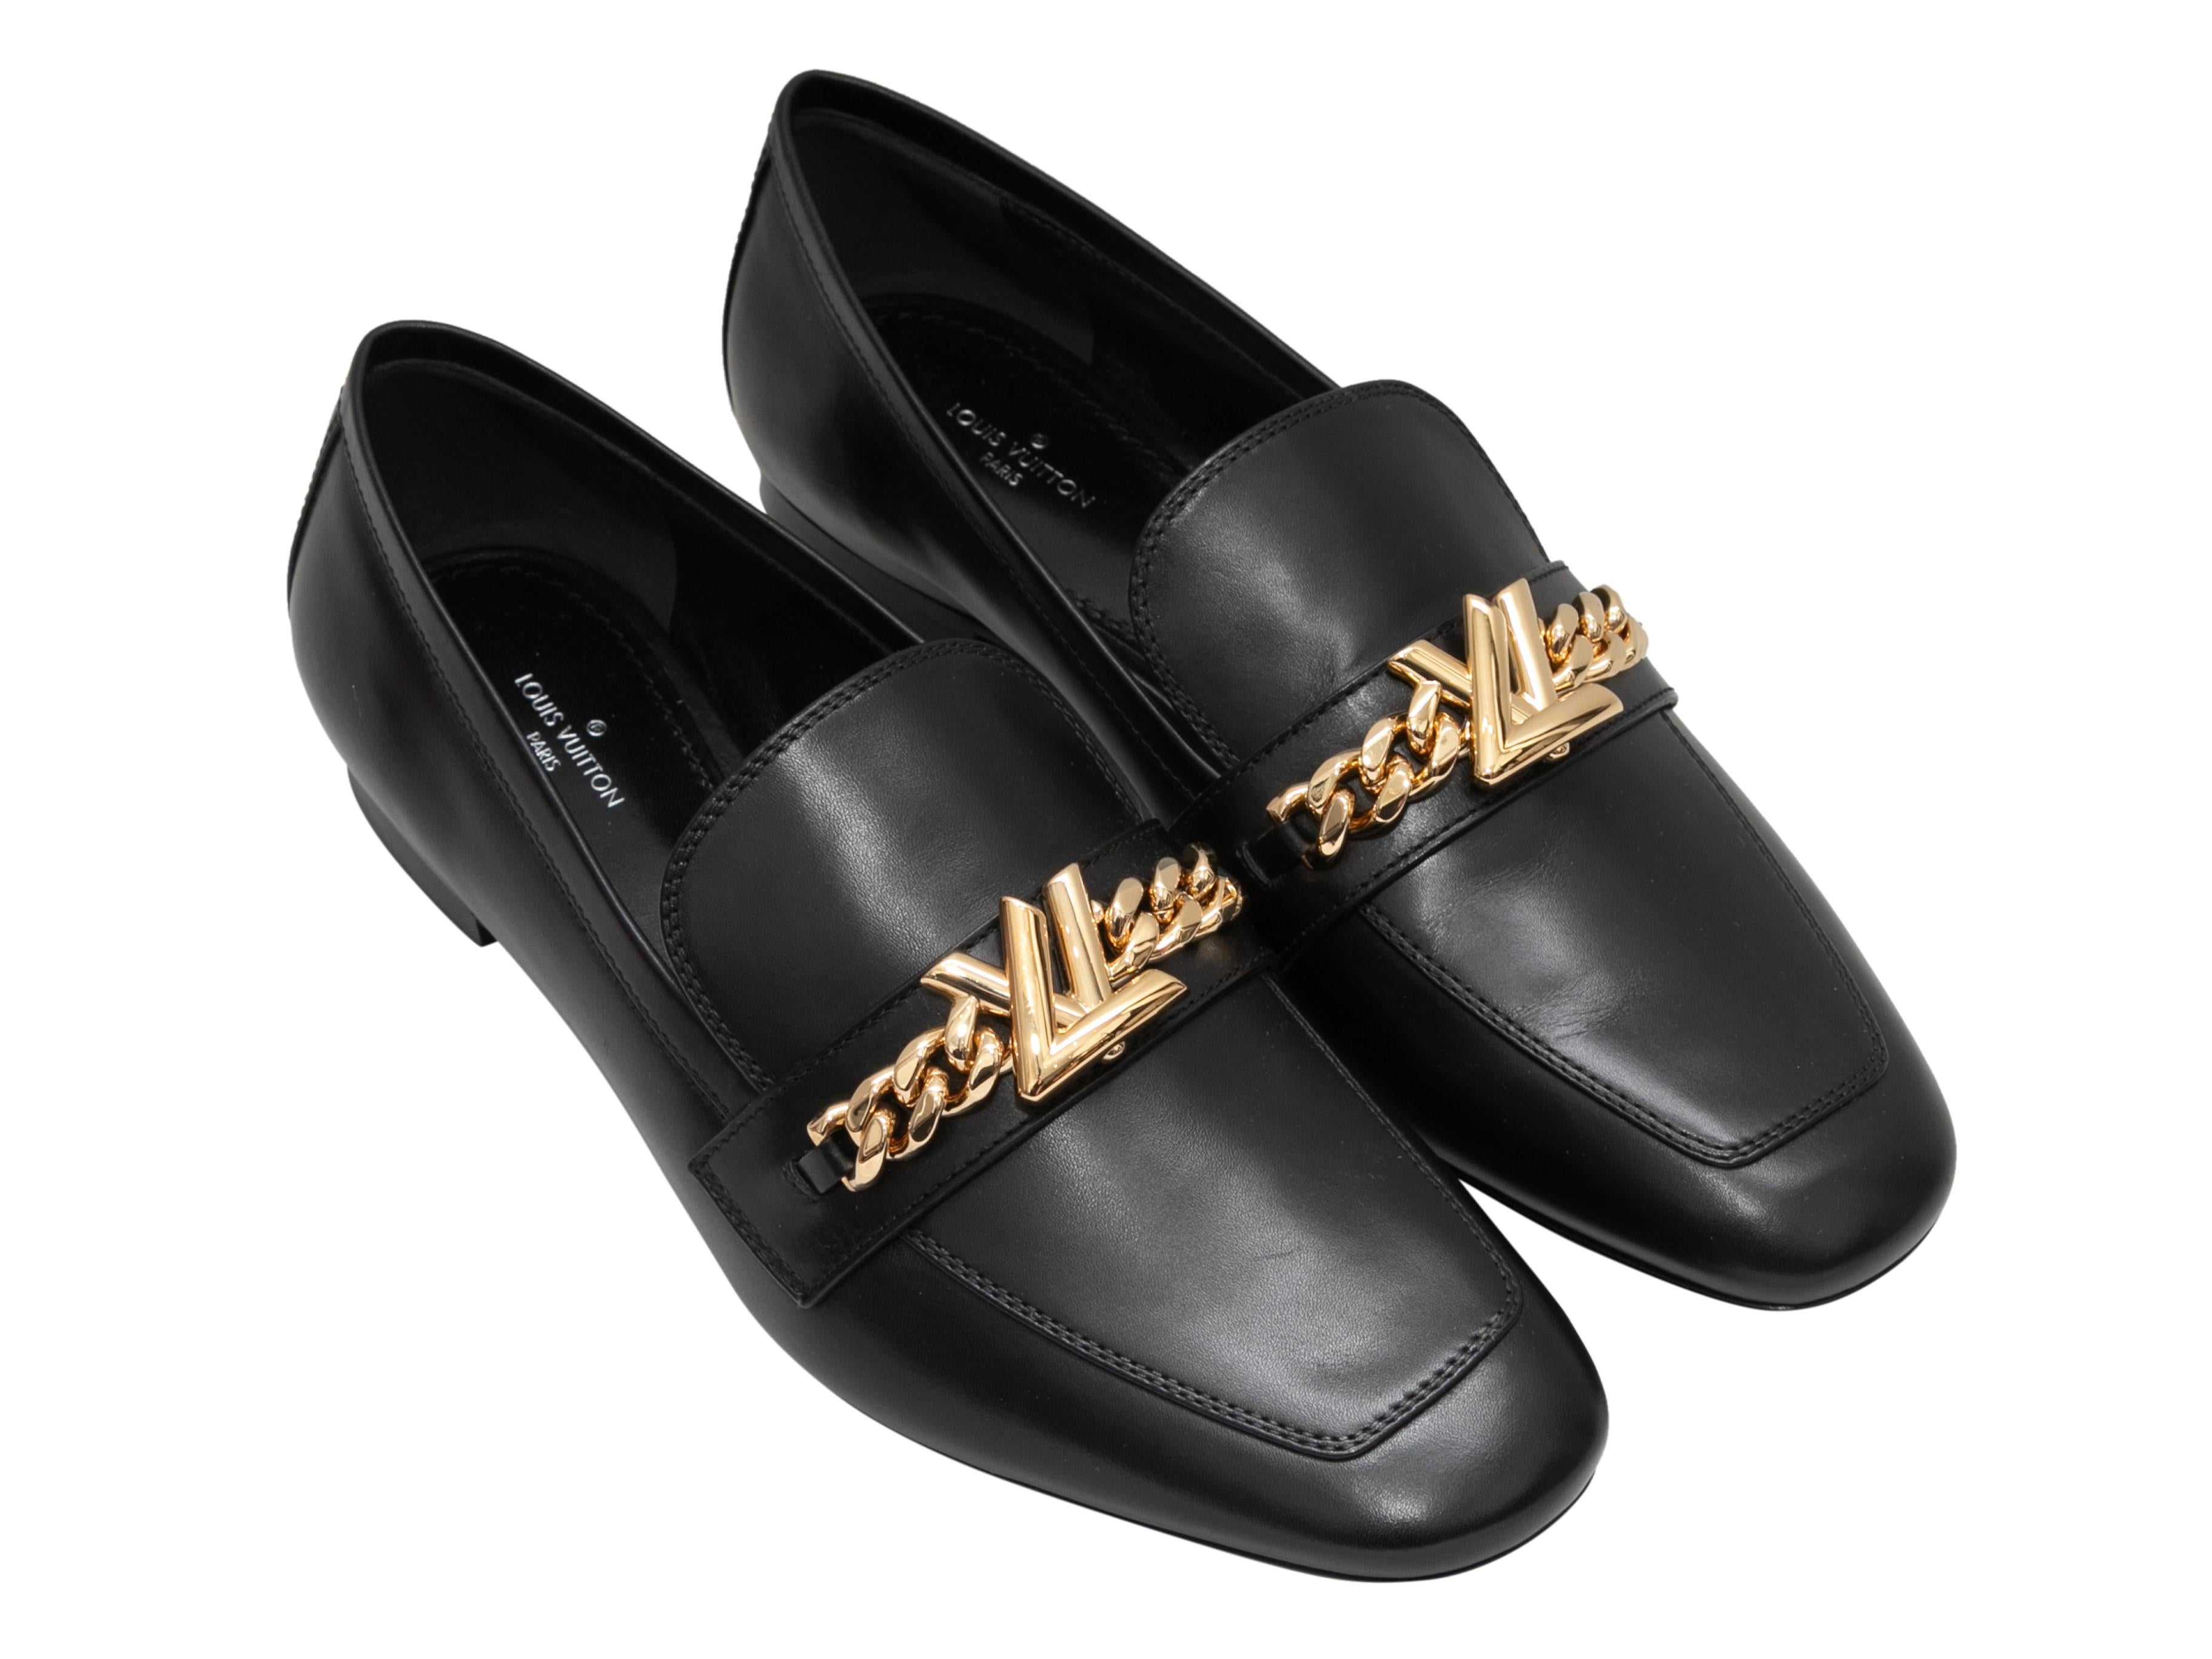 Black leather Upper Case loafers by Louis Vuitton. Gold-tone hardware at tops. 0.25